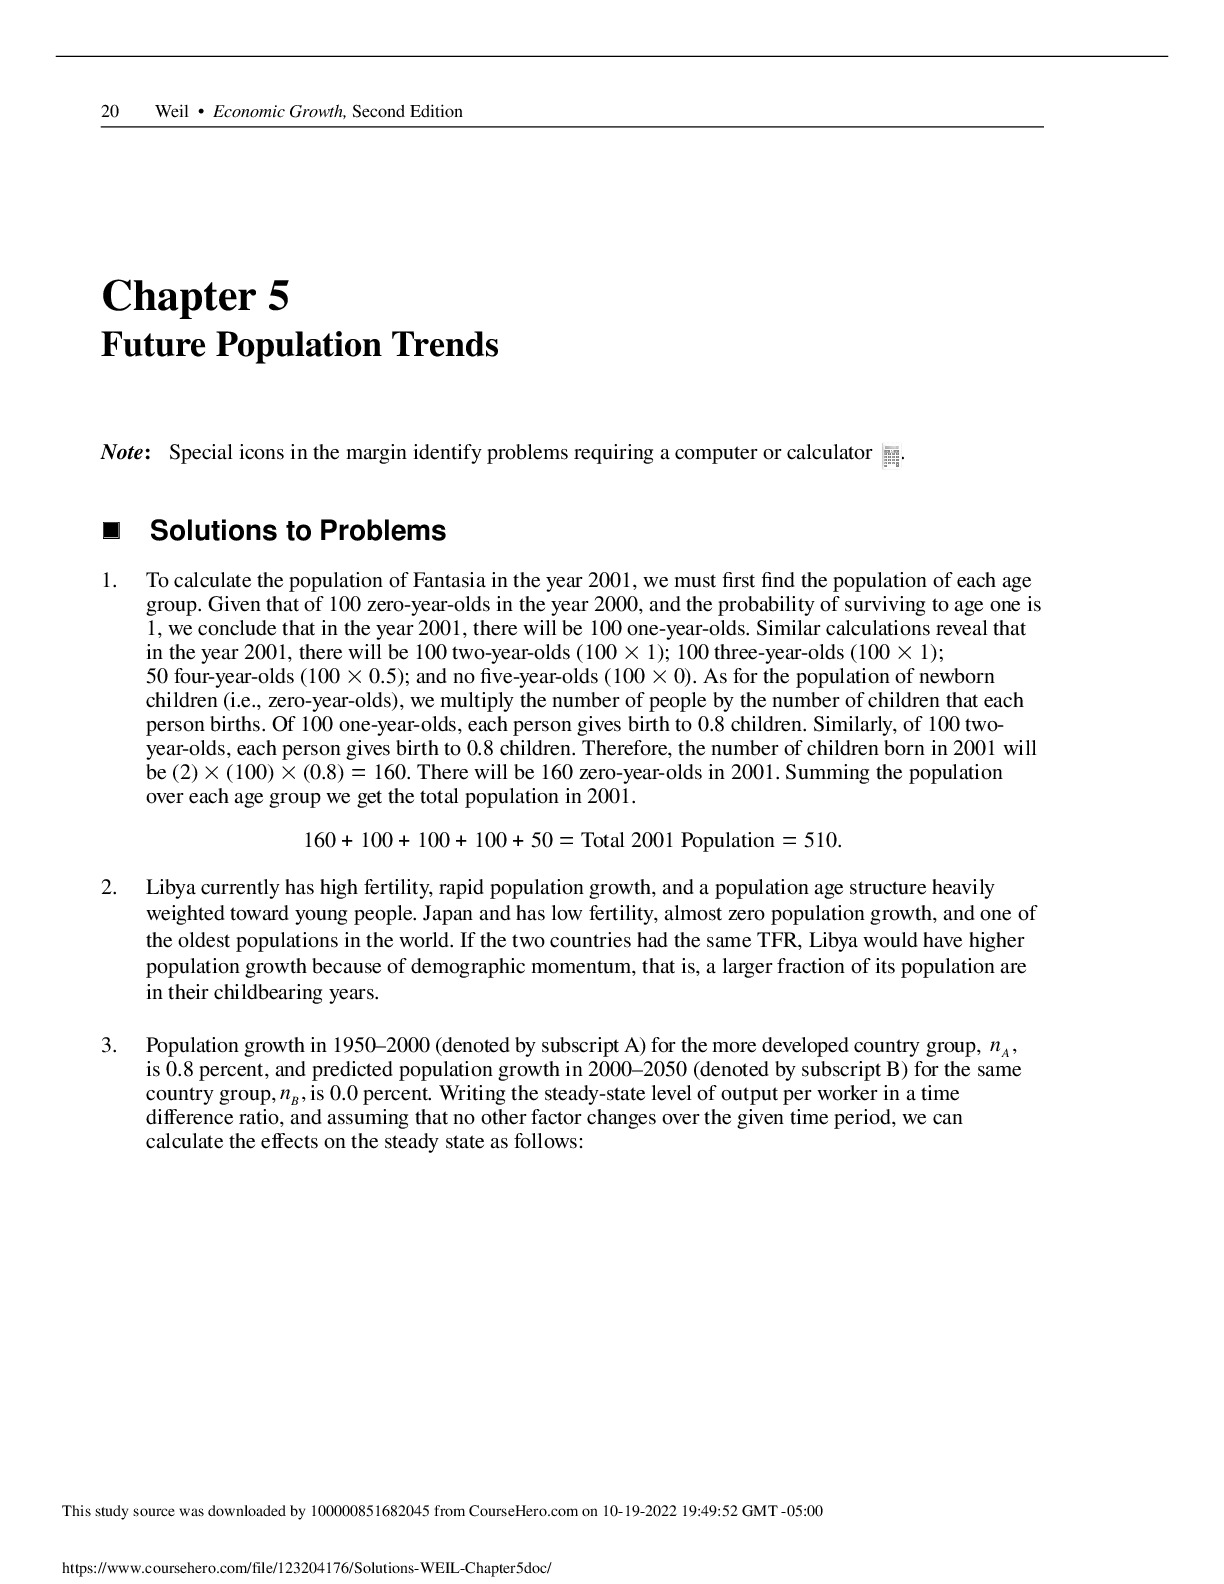 Solutions_WEIL_Chapter5.doc